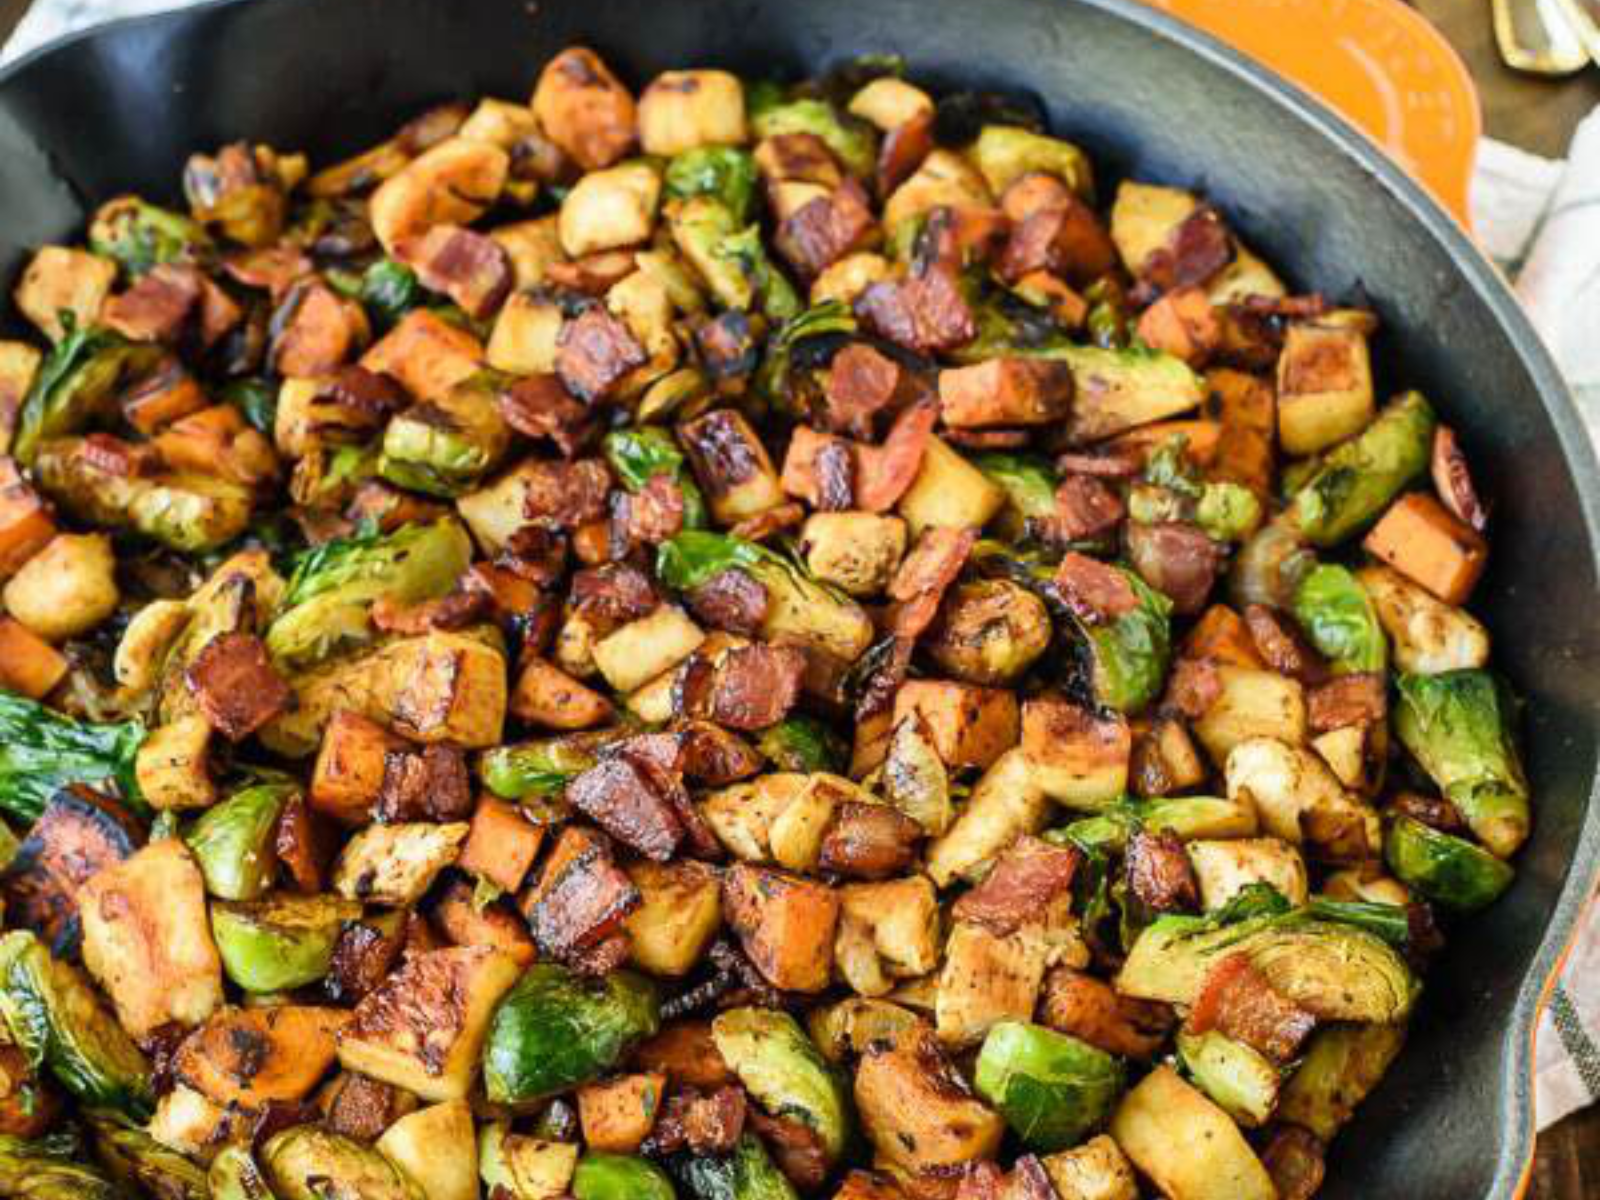 Chicken, Apple, Sweet Potato, and Brussels Sprouts Skillet